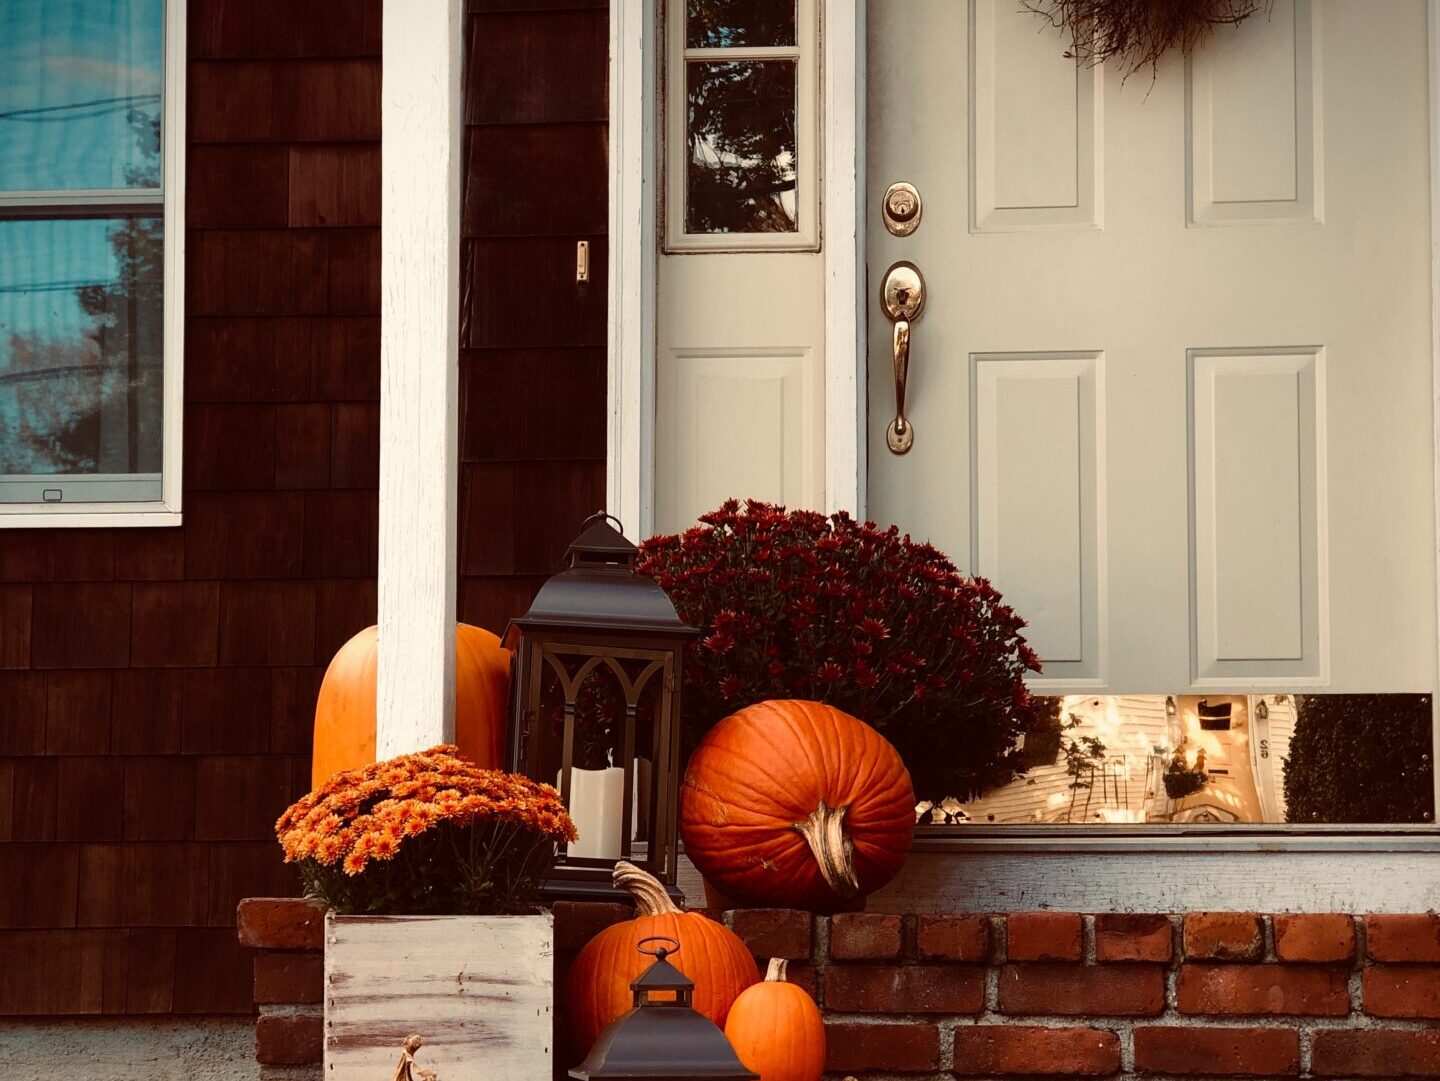 Autumn decorating ideas for your front porch